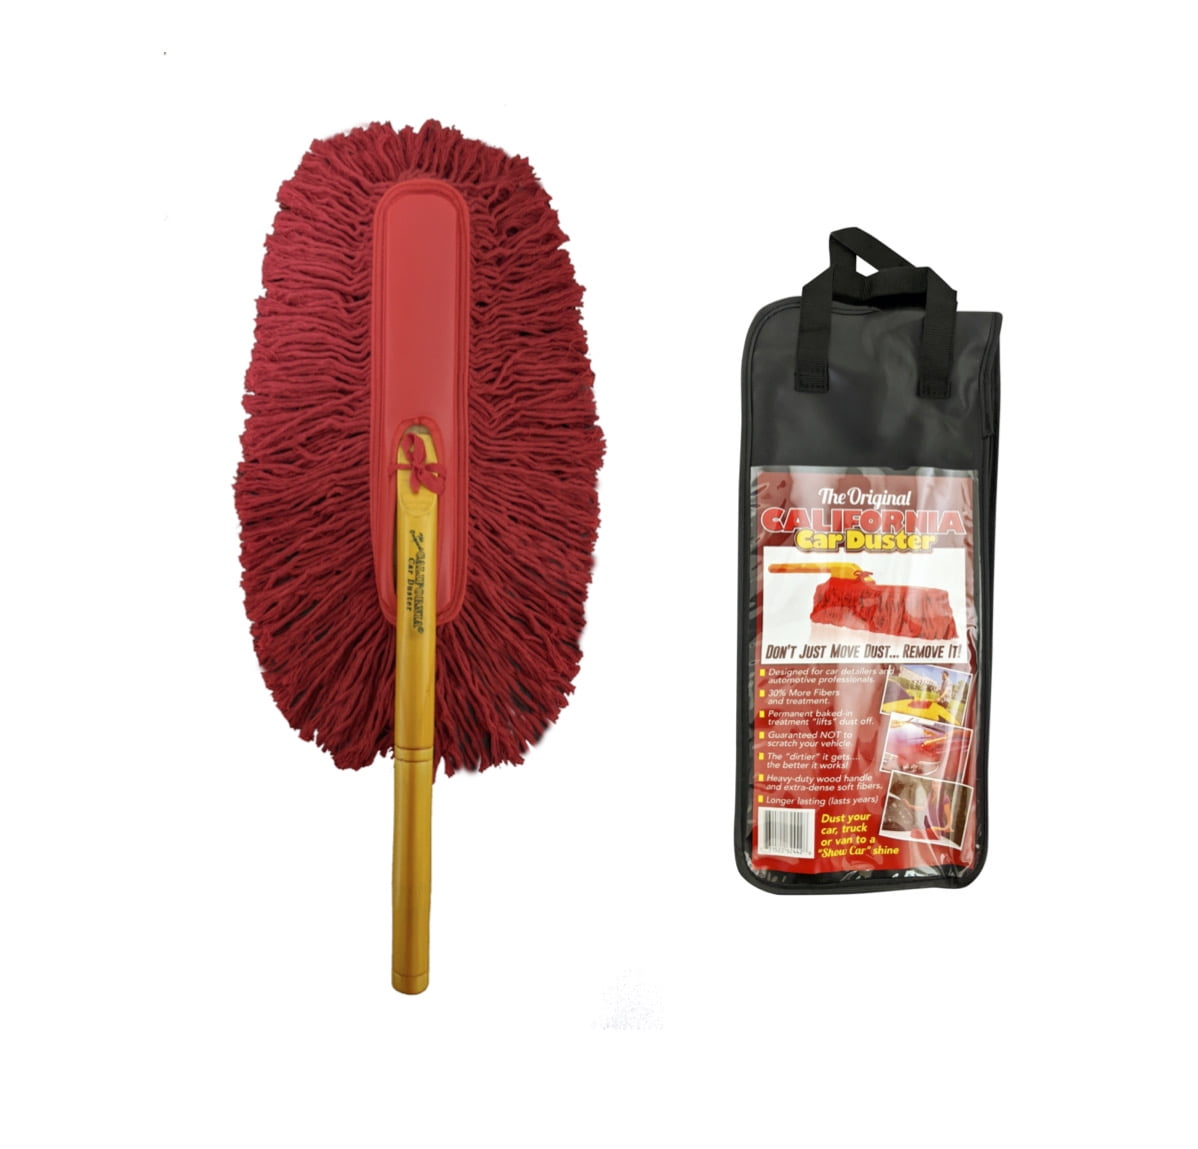 The Original California Car Duster California Car Duster 62443 Standard Car  Duster with Plastic Handle, Red 25 Inch